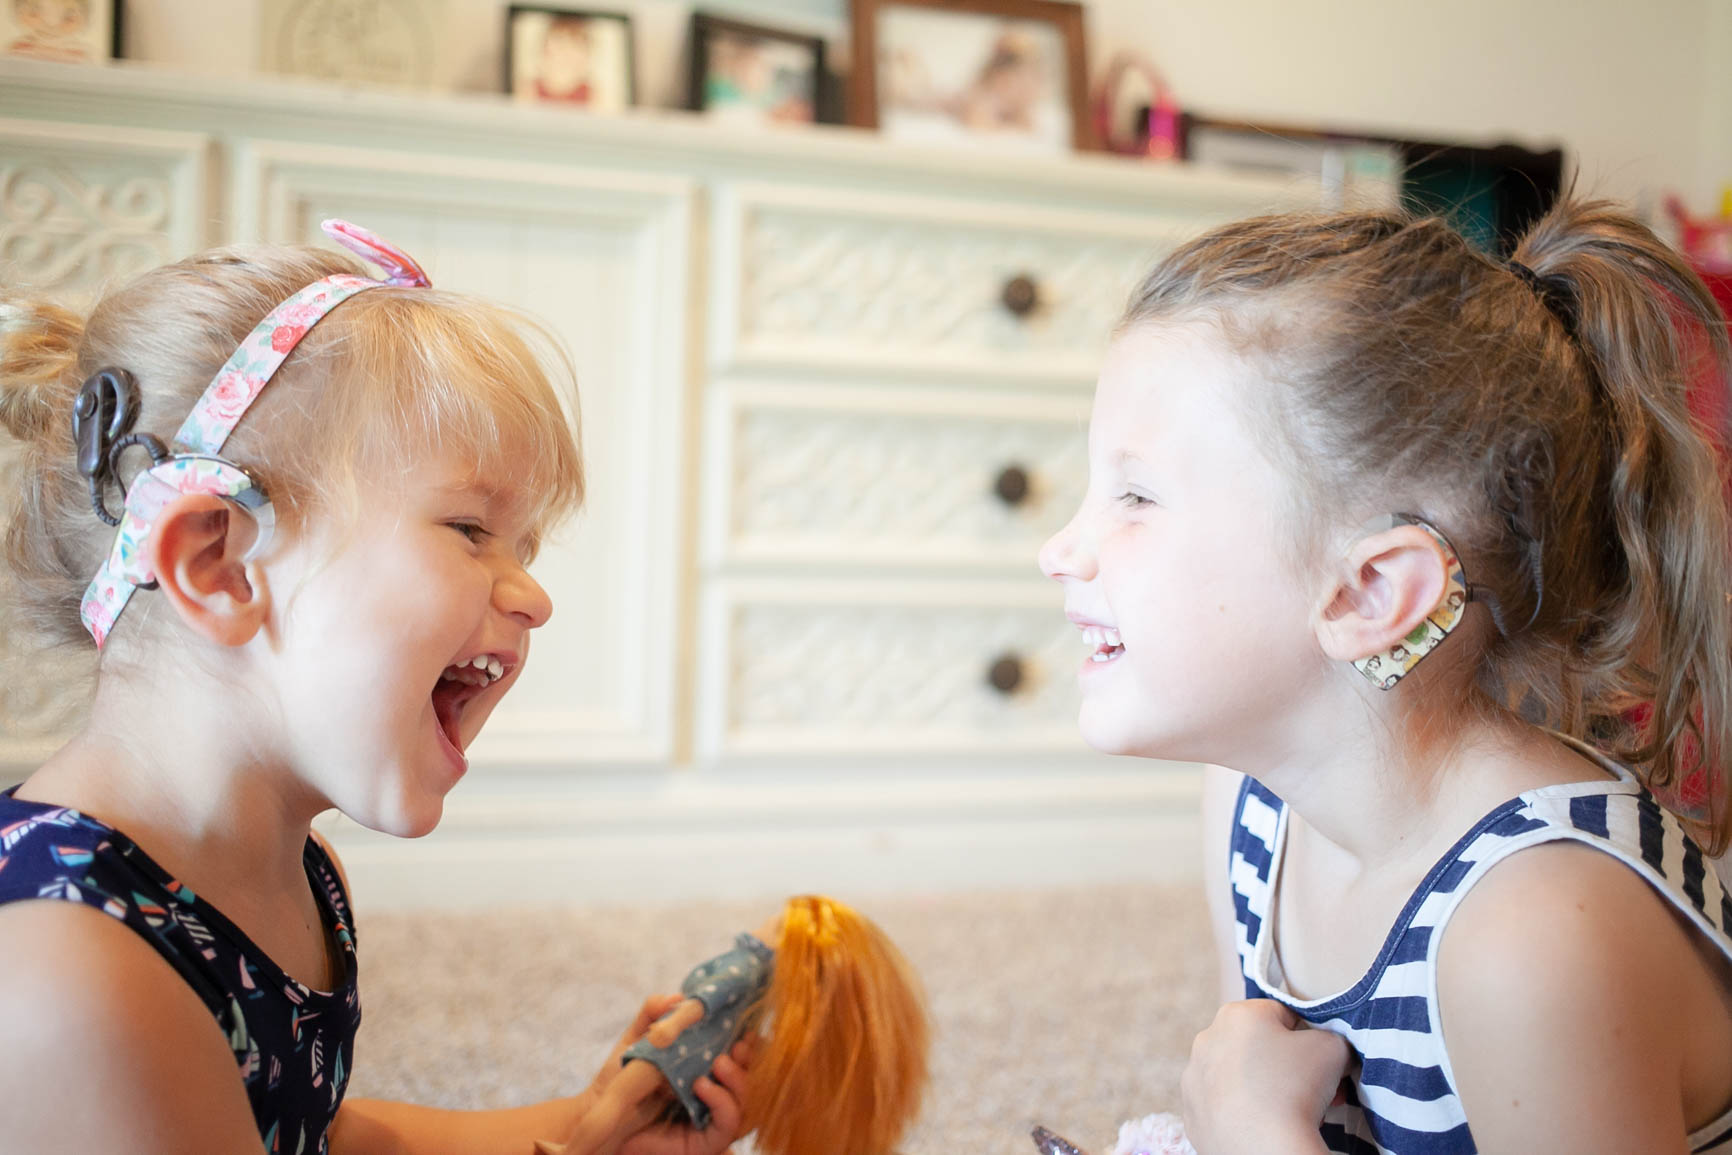 A toddler and preschooler with cochlear implants.